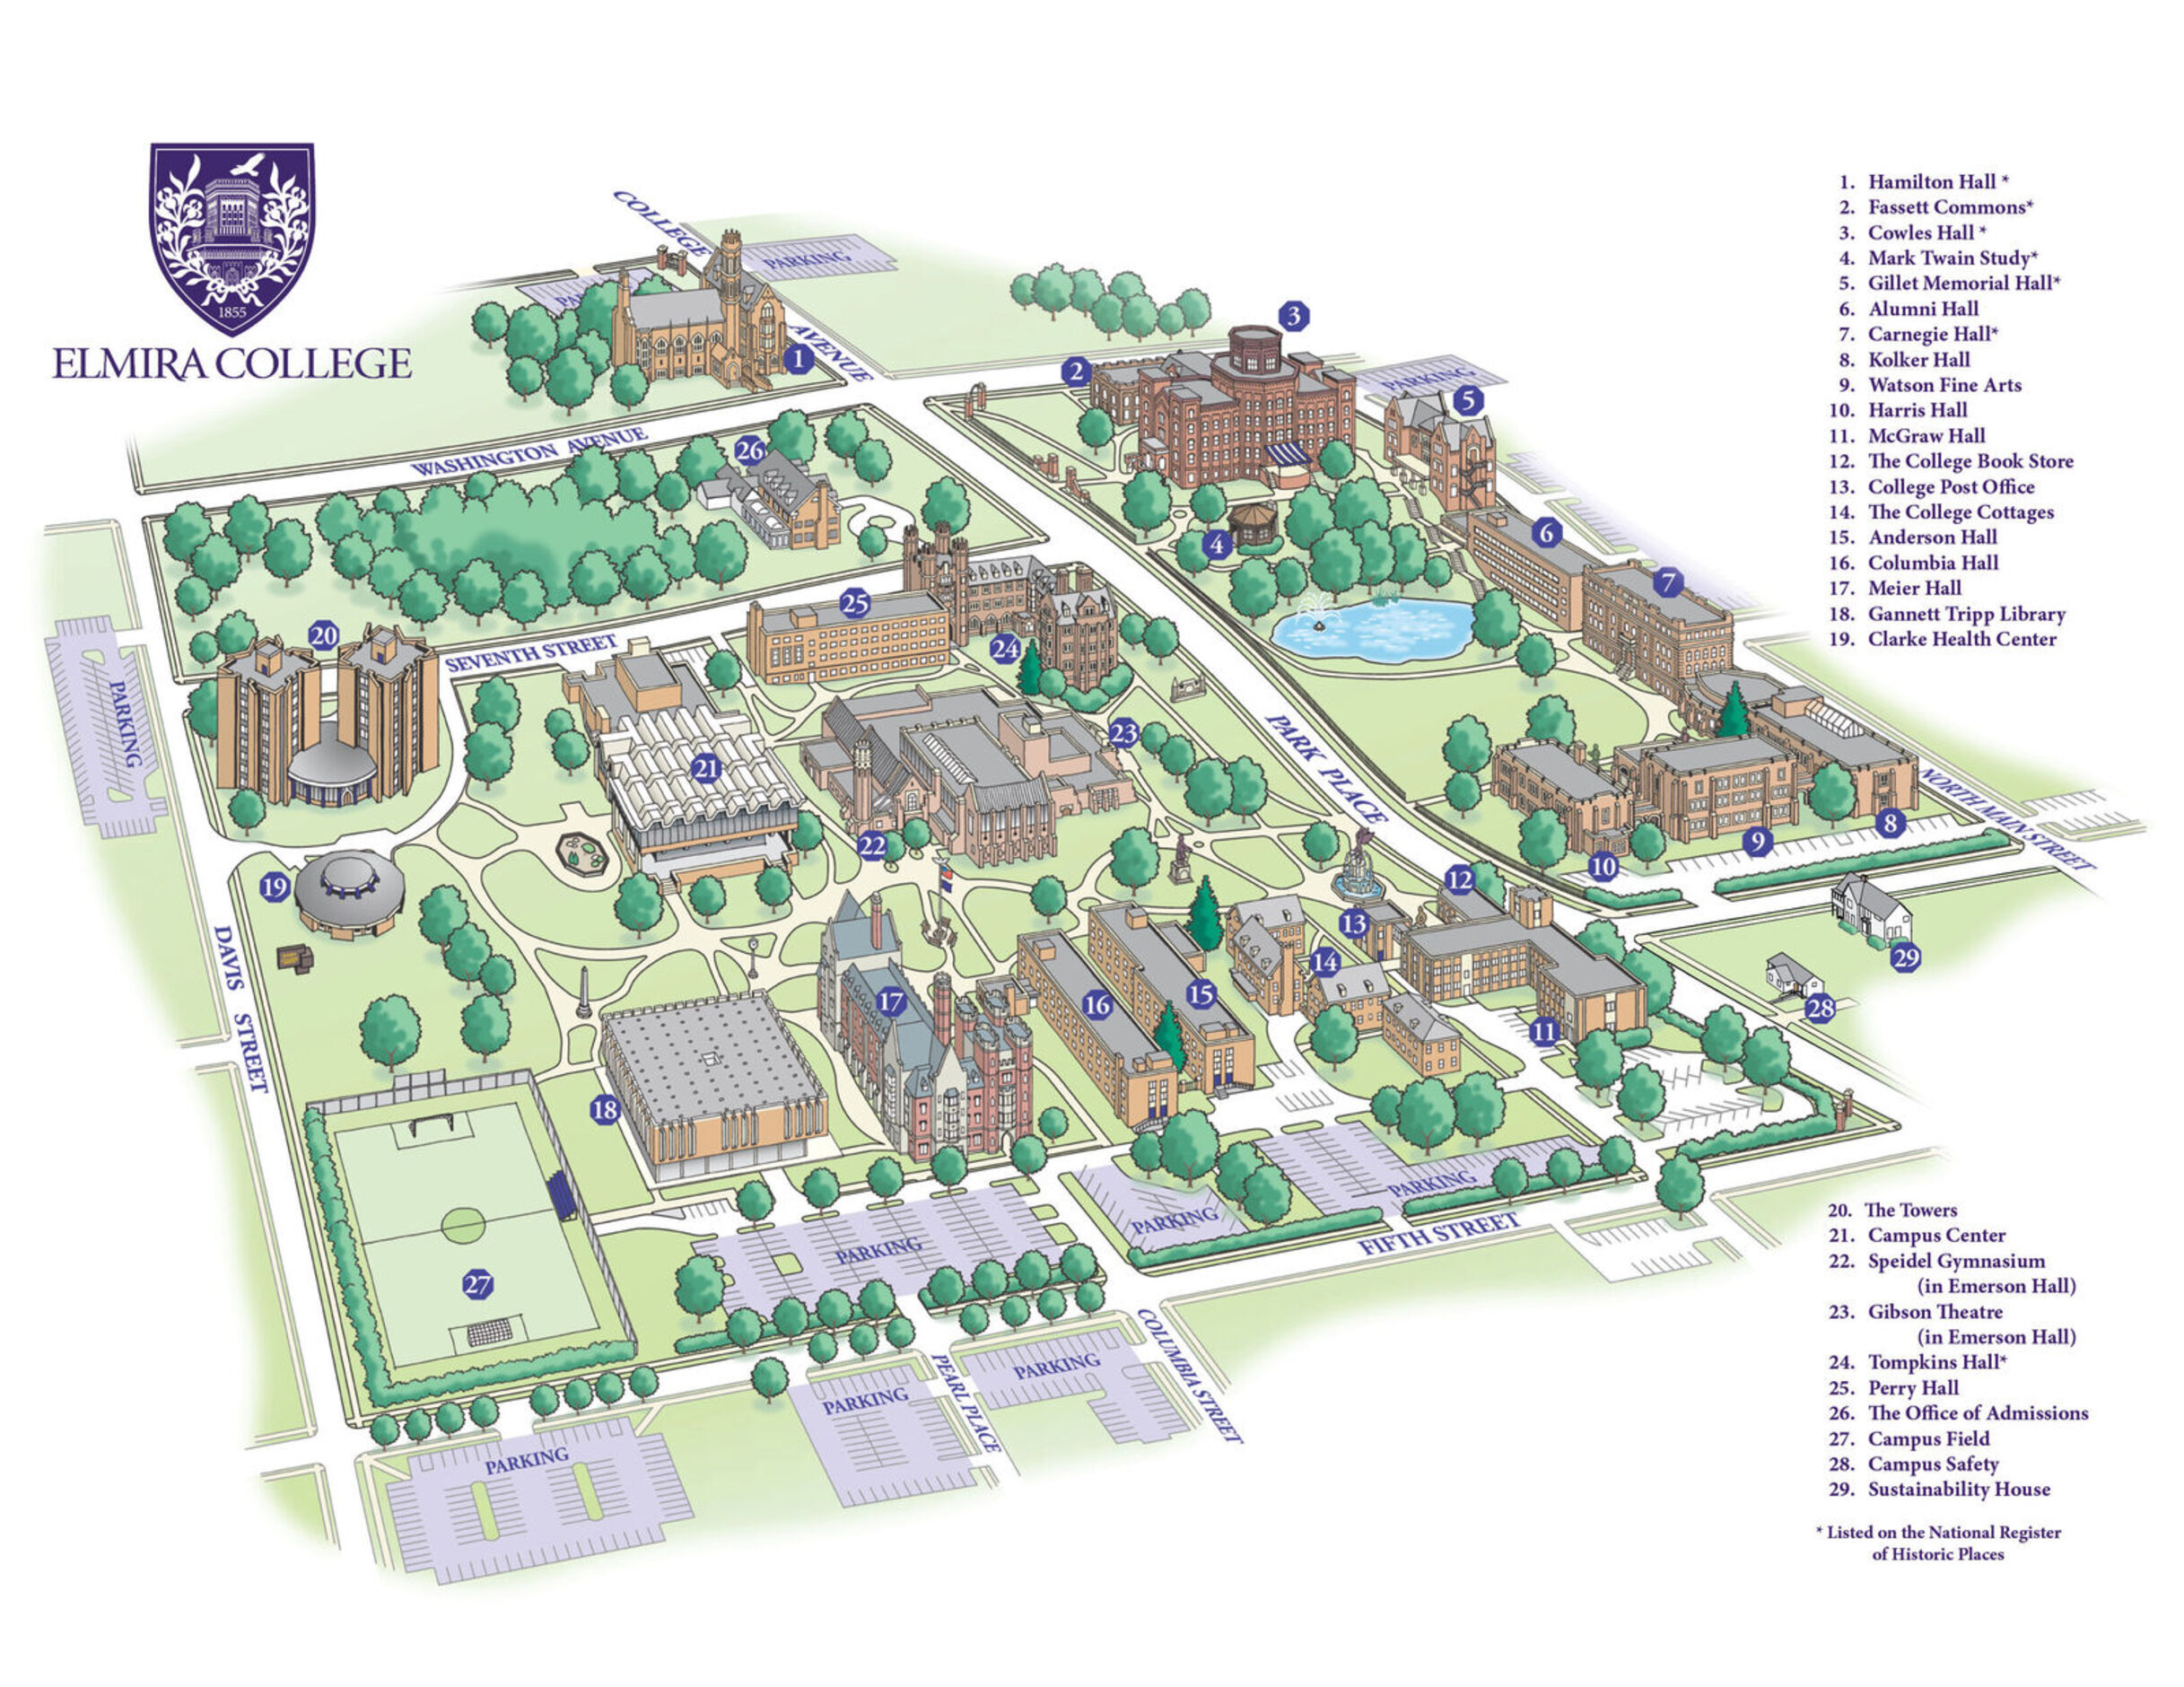 A map of the Elmira College campus